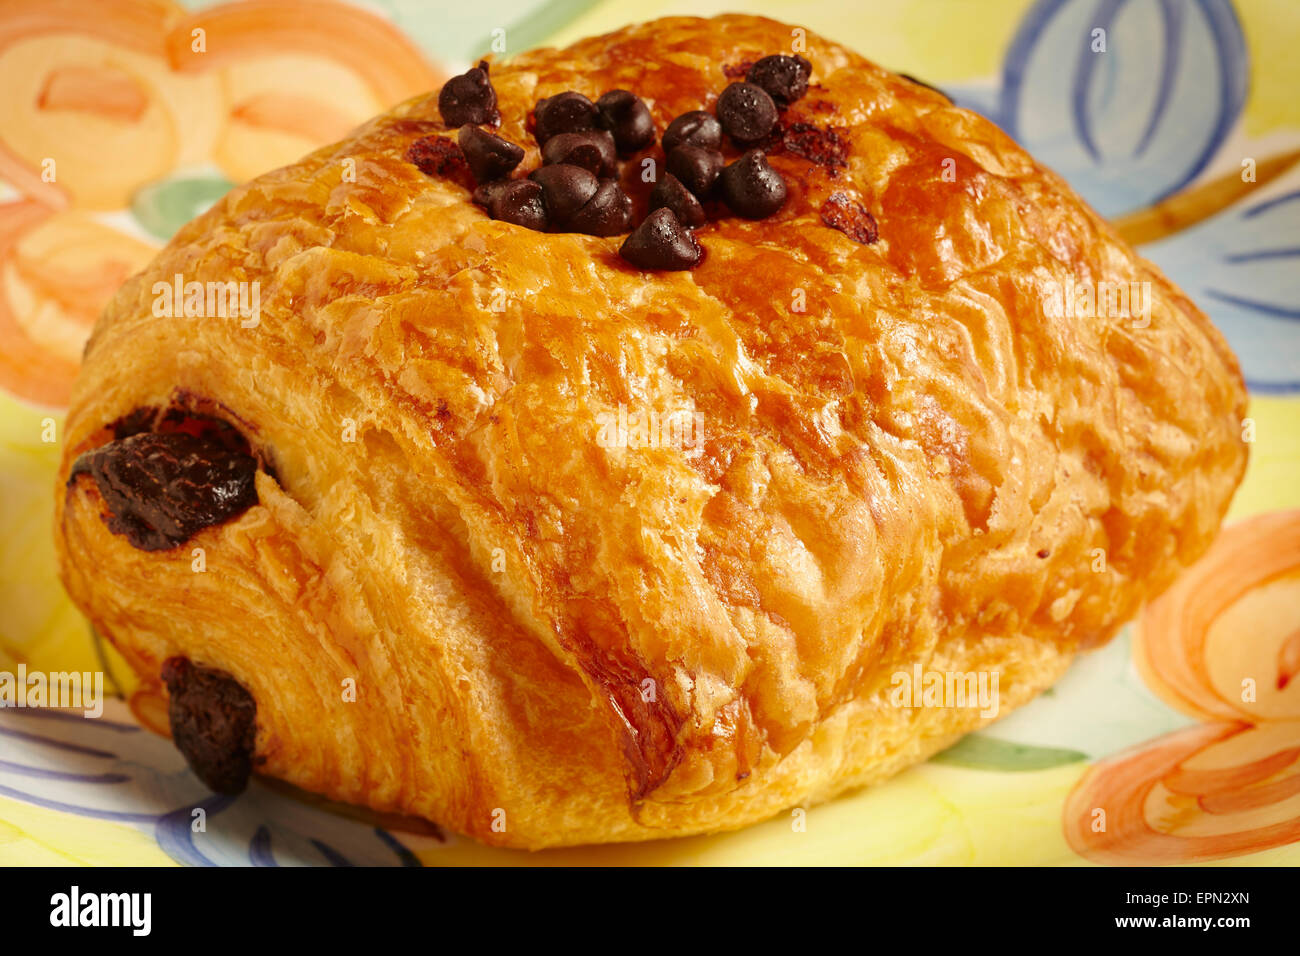 chocolate croissant from an American supermarket Stock Photo